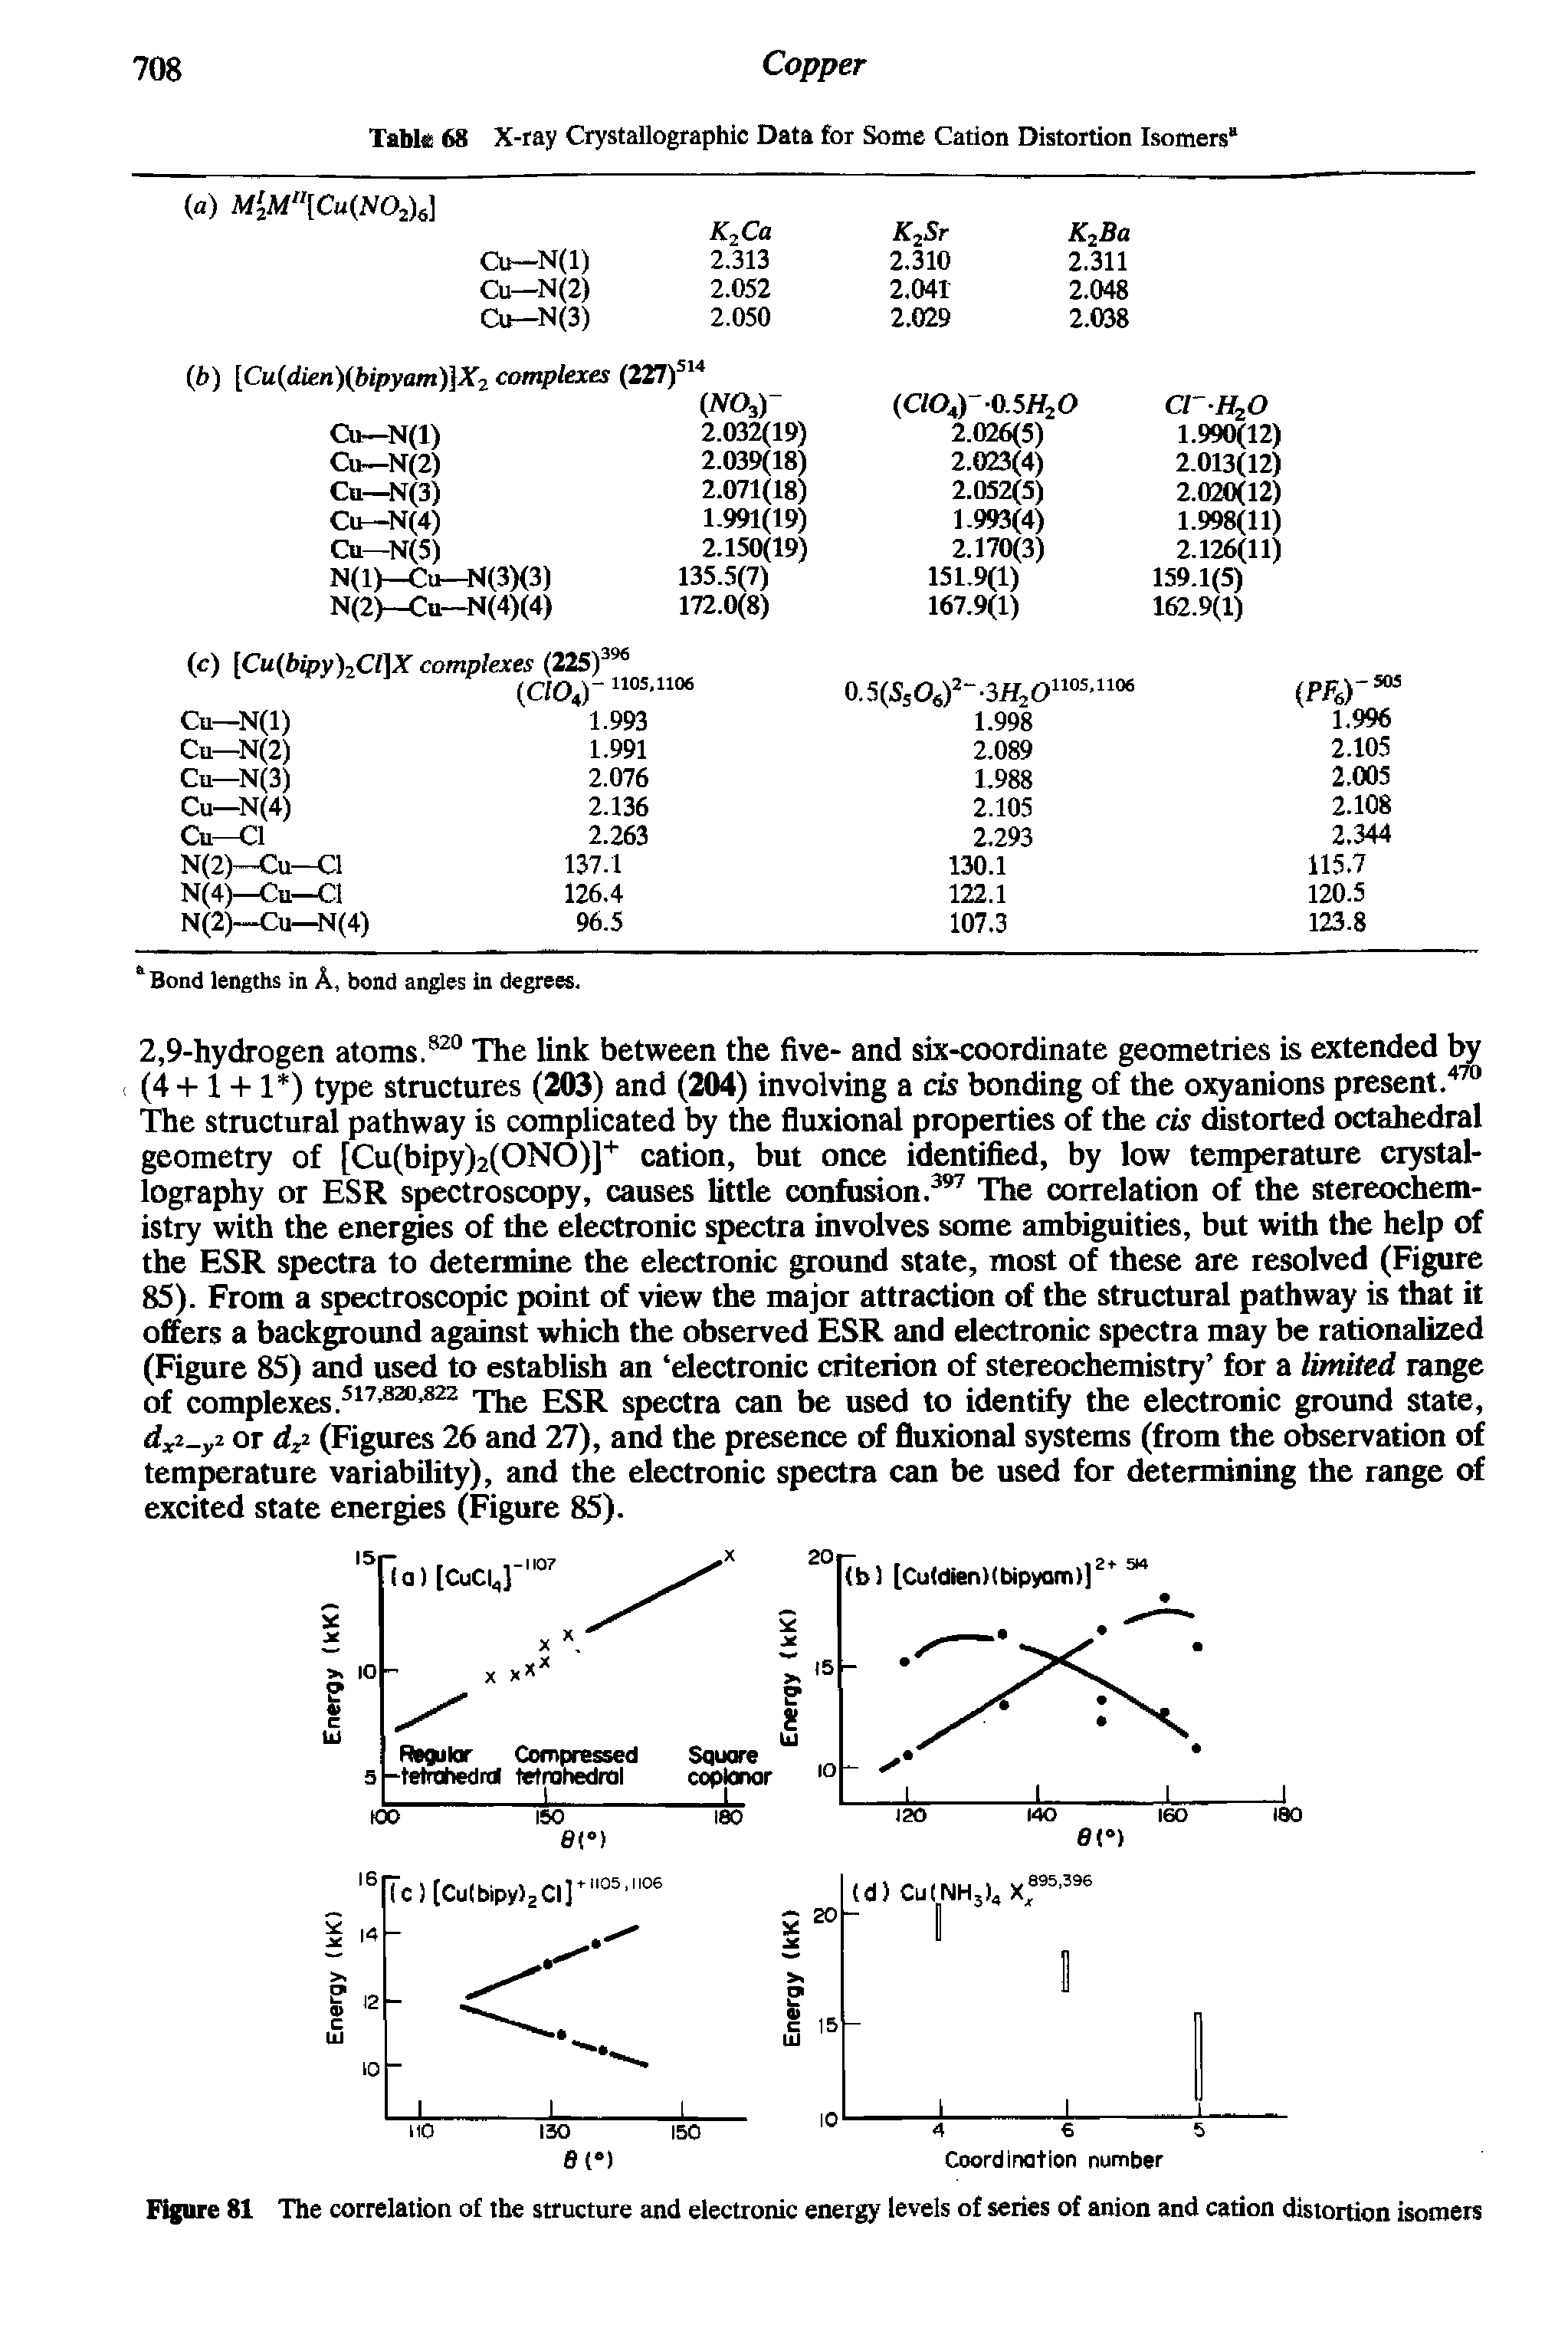 Figure 81 The correlation of the structure and electronic energy levels of series of anion and cation distortion isomers...